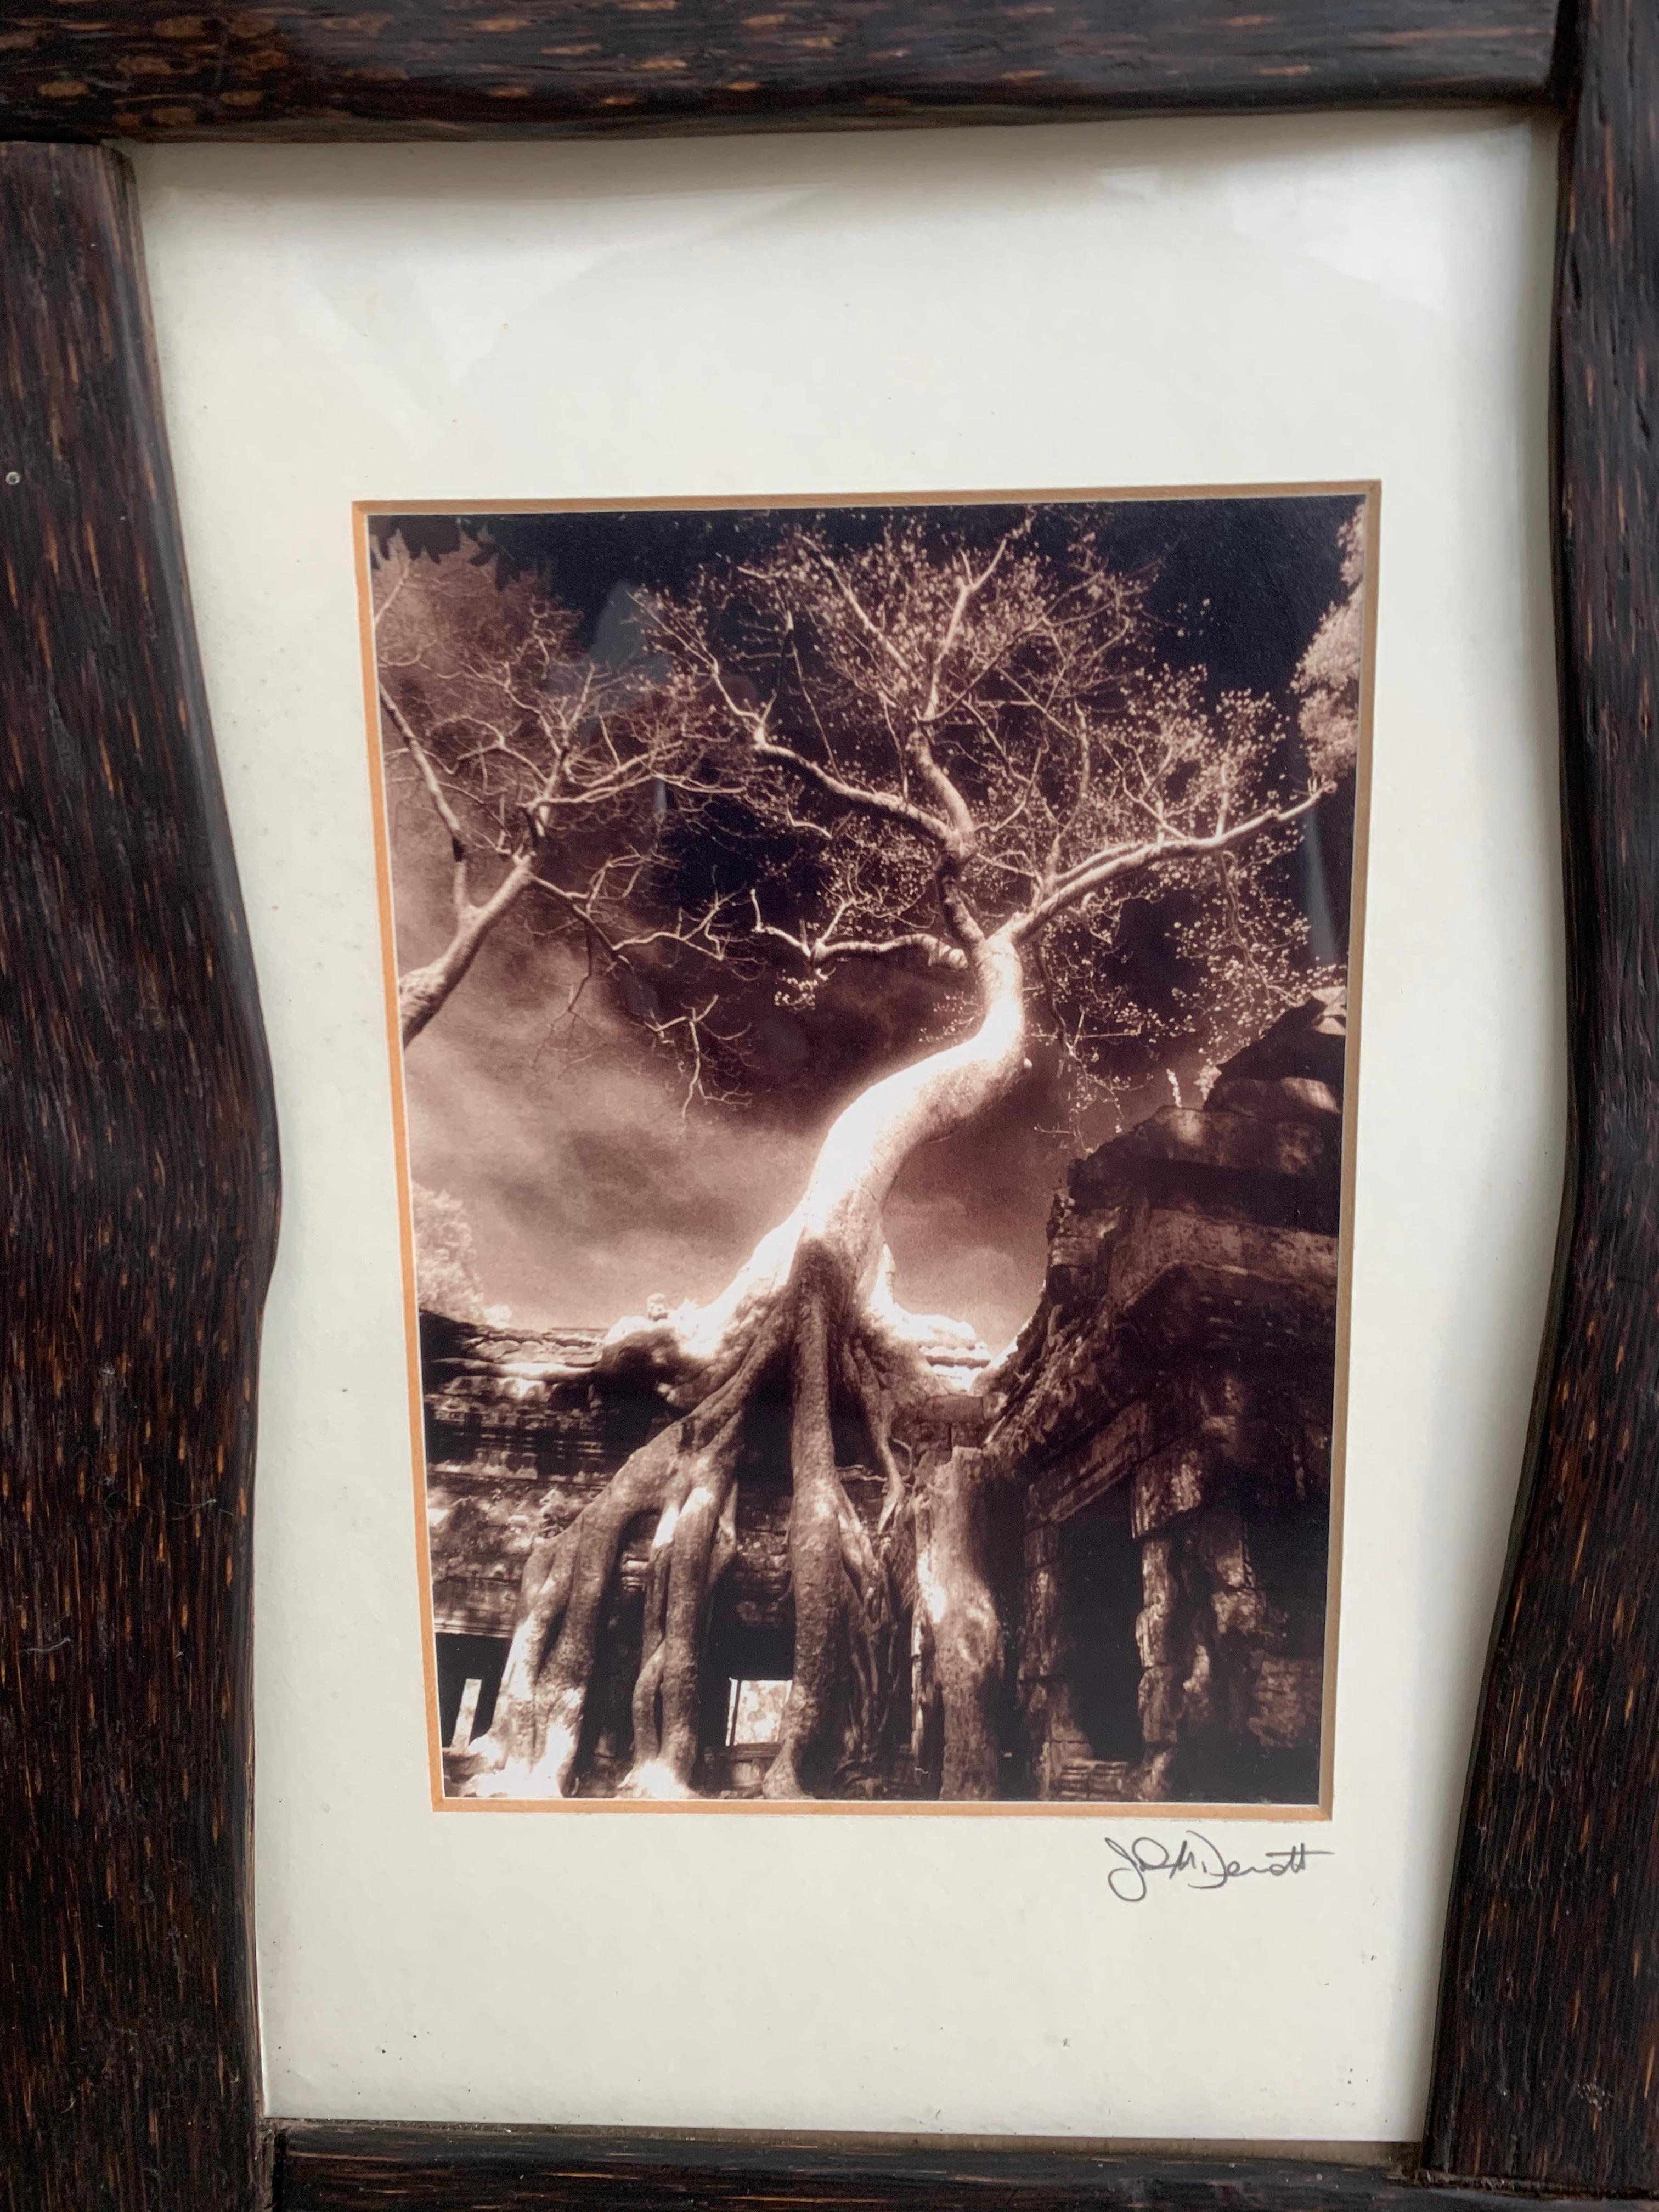 A vintage photograph from Cambodia framed in a palm wood & glass frame.

Dimensions: Height 38cm x Width 27cm x Depth 0.05cm.
 